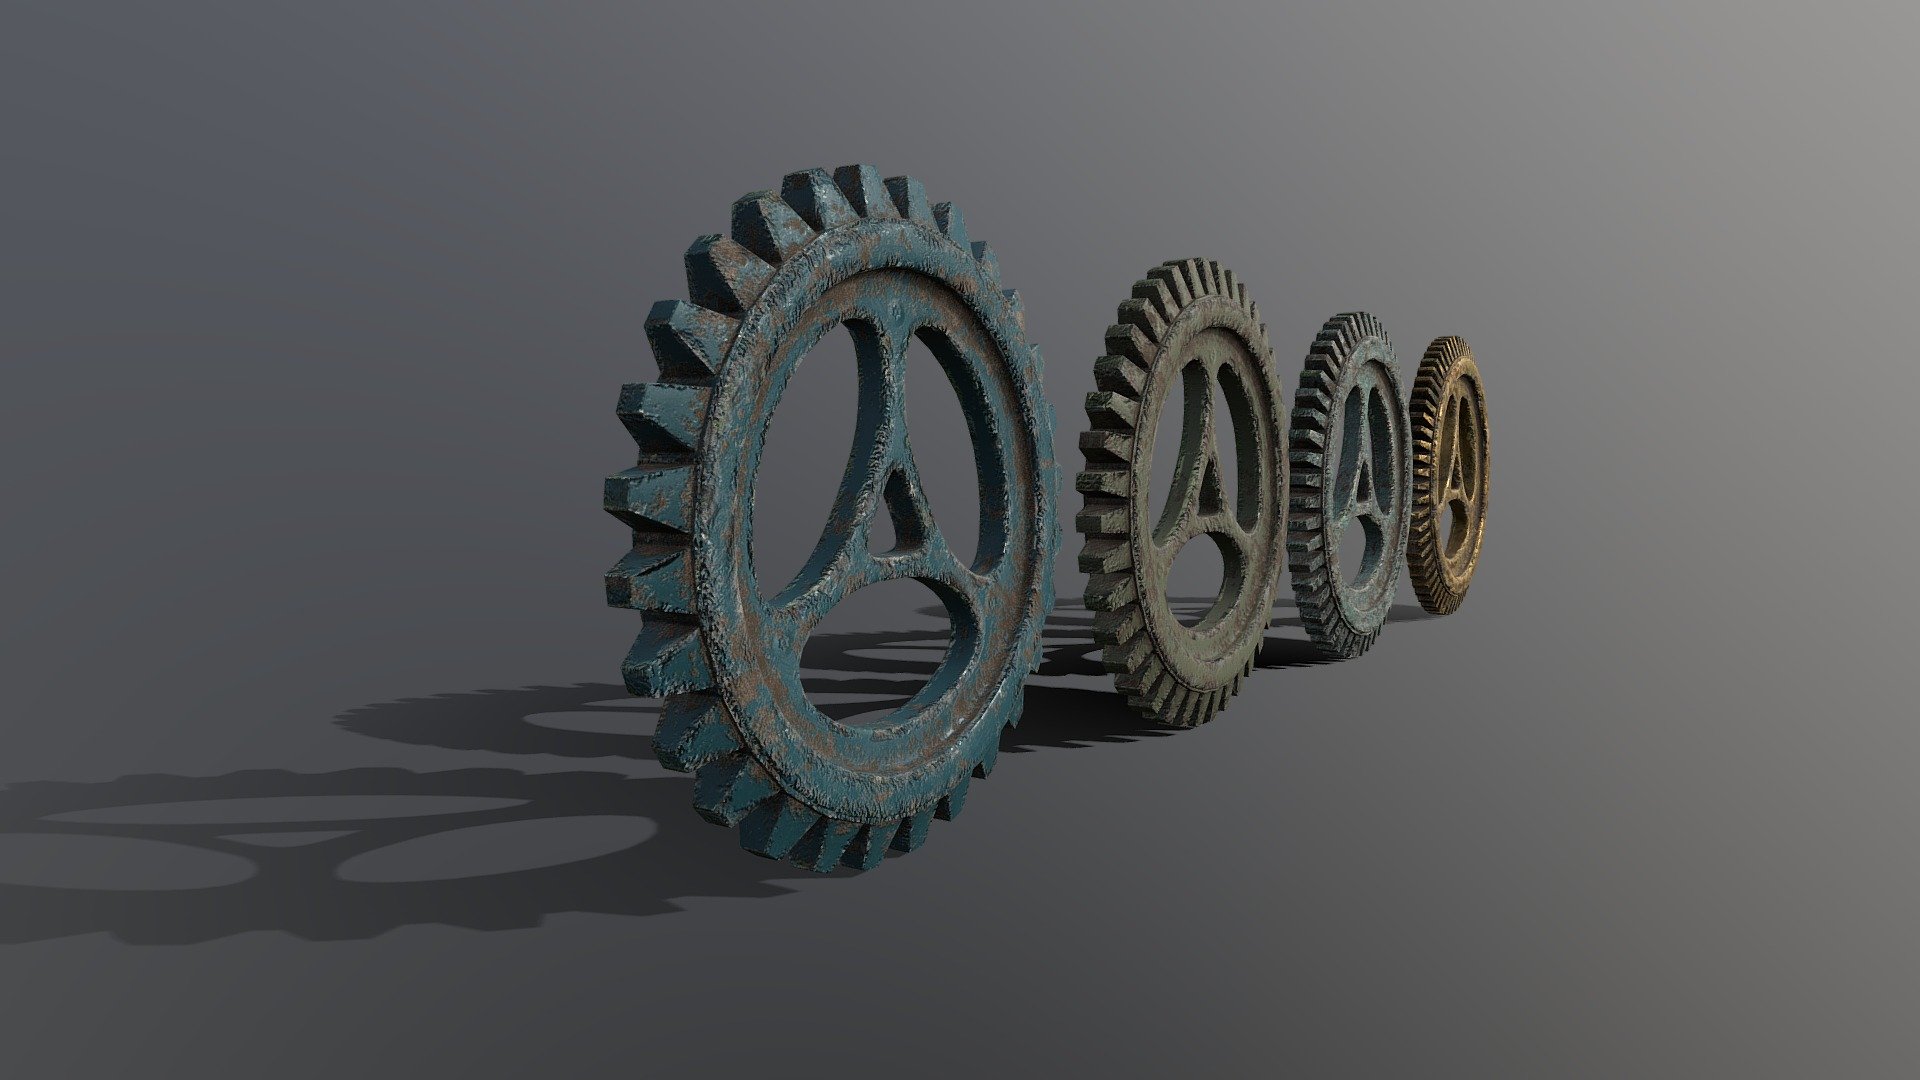 Industrial Gear Set 06

All objects Modelled to give a worn, aged look to each Gear, which you can easily build up a complex Gear system to fit within your project/scene

Great assets if you are creating a Steampunk scene!

Modelled in Blender 2.80 

3 Formats included:

Blend

Fbx

Obj/Mtl

All Textures

Textured in Substance Painter 2

Approximate Diameter of each Gear: 400cm

Scale: 1.000 Metric

2K Resolution Maps / PBR /: Colour, Metallic, Roughness &amp; Normal 

(Height Maps provided in the Textures folder if you wish to use them)

2048 x 2048 Maps

Origin of all Models: Centre Of Mass

Please note if you are using EEVEE:

You may need to go into the Render Properties Tab - Performance - Enable High Quality Normals

Unwrapped - non overlapping UVs

Clean Topology, no loose or double Vertices

Of course any of these Objects can be duplicated as many times as you like - Multiple Industrial Gears!

Thanks for your interest &amp; Support!

MagicCGIStudios - Industrial Gear Set 06 - Buy Royalty Free 3D model by MagicCGIStudios 3d model